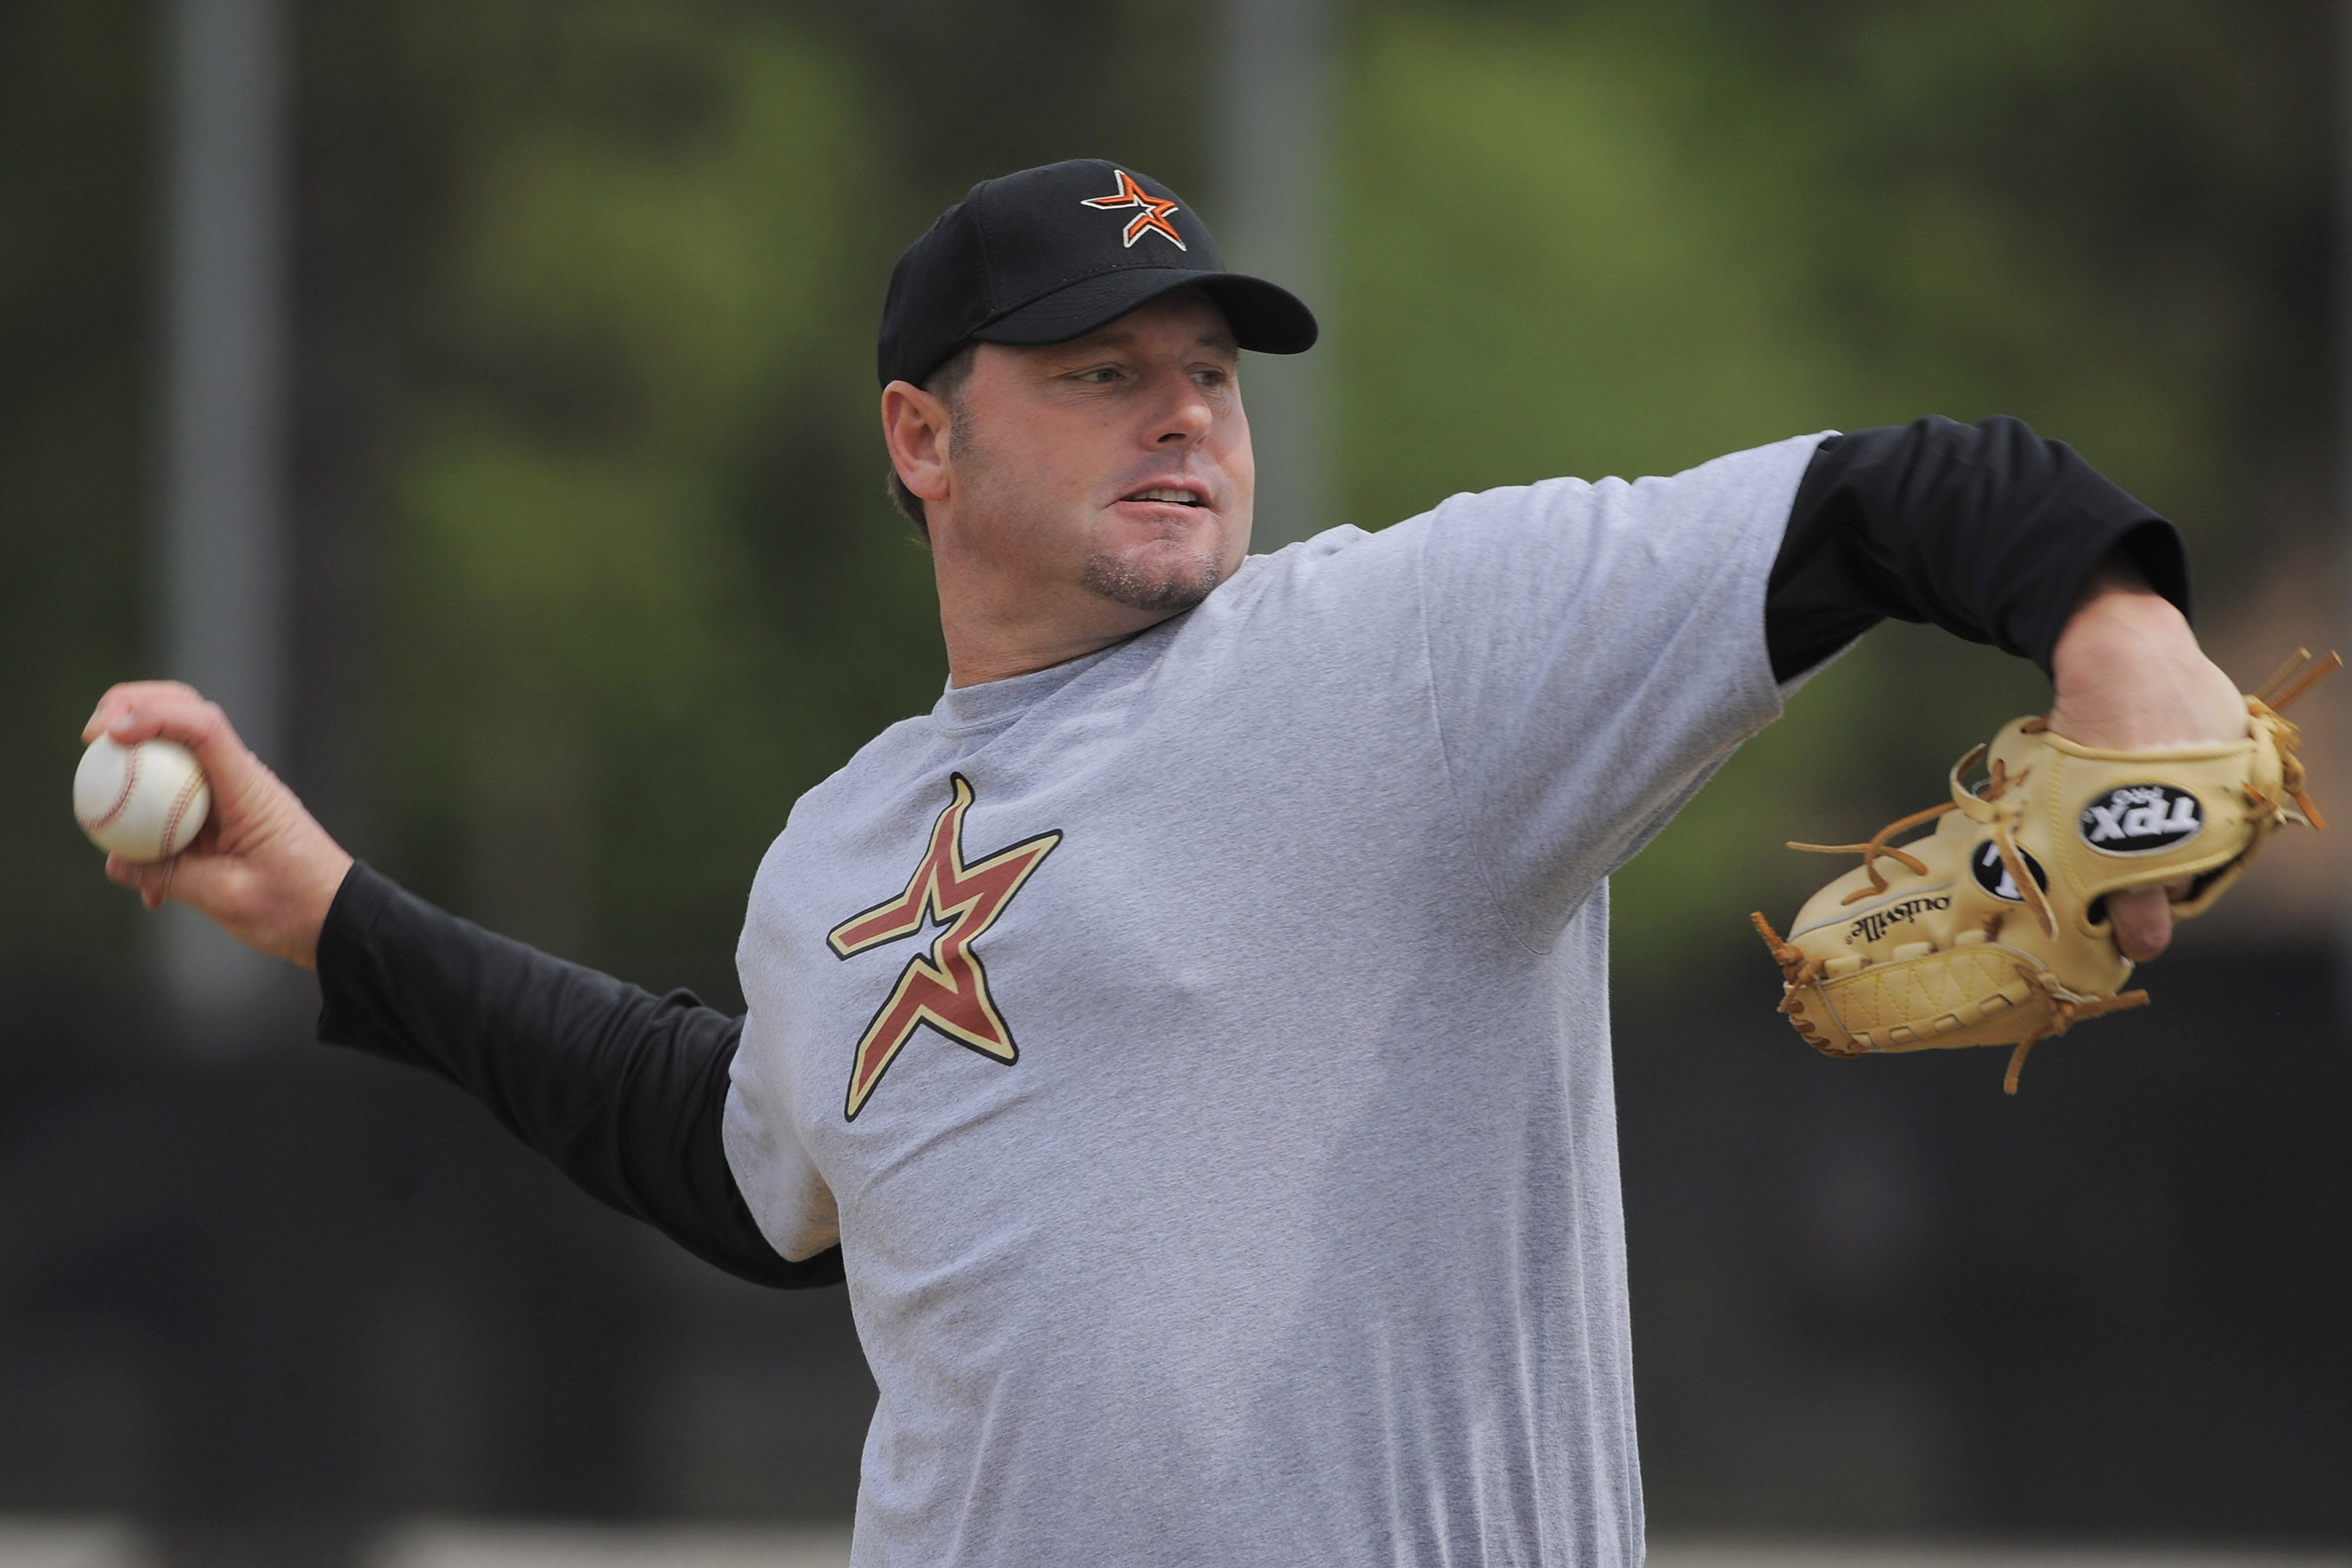 KISSIMMEE, FL - FEBRUARY 27: Roger Clemens throws during minor league batting practice at Houston Spring Training at Osceola County Stadium on February 27, 2008 in Kissimmee, Florida. The U.S. House Oversight and Government Reform Committee has asked the